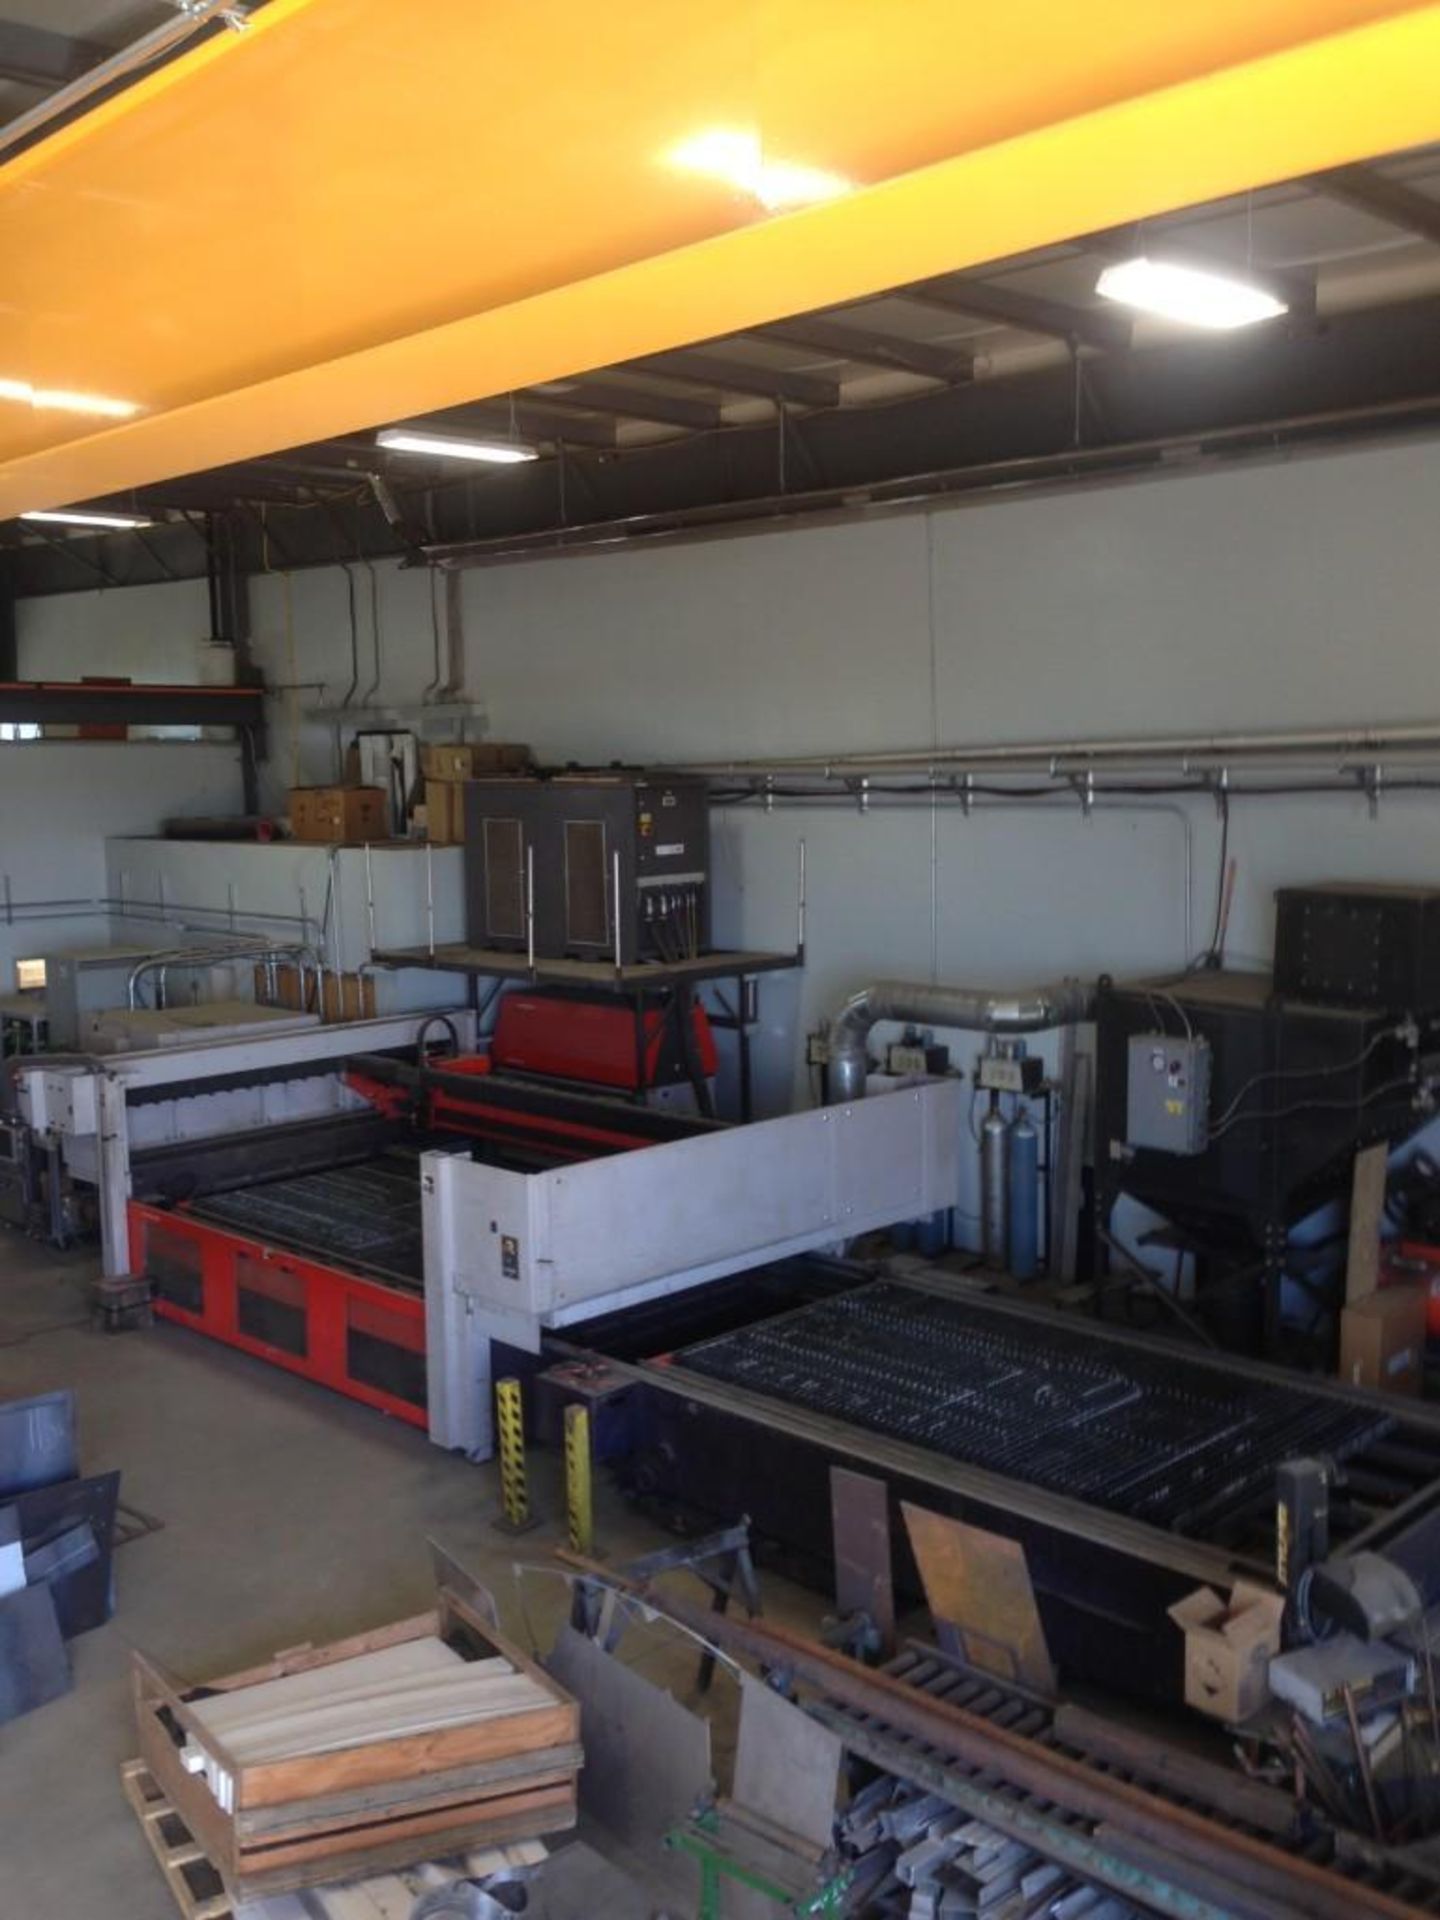 2008 Bystronic Bystar 4020 w/ 2008 ByLaser 6000 Laser Cutting System. Bed Size: 80" x 160" - Image 43 of 45